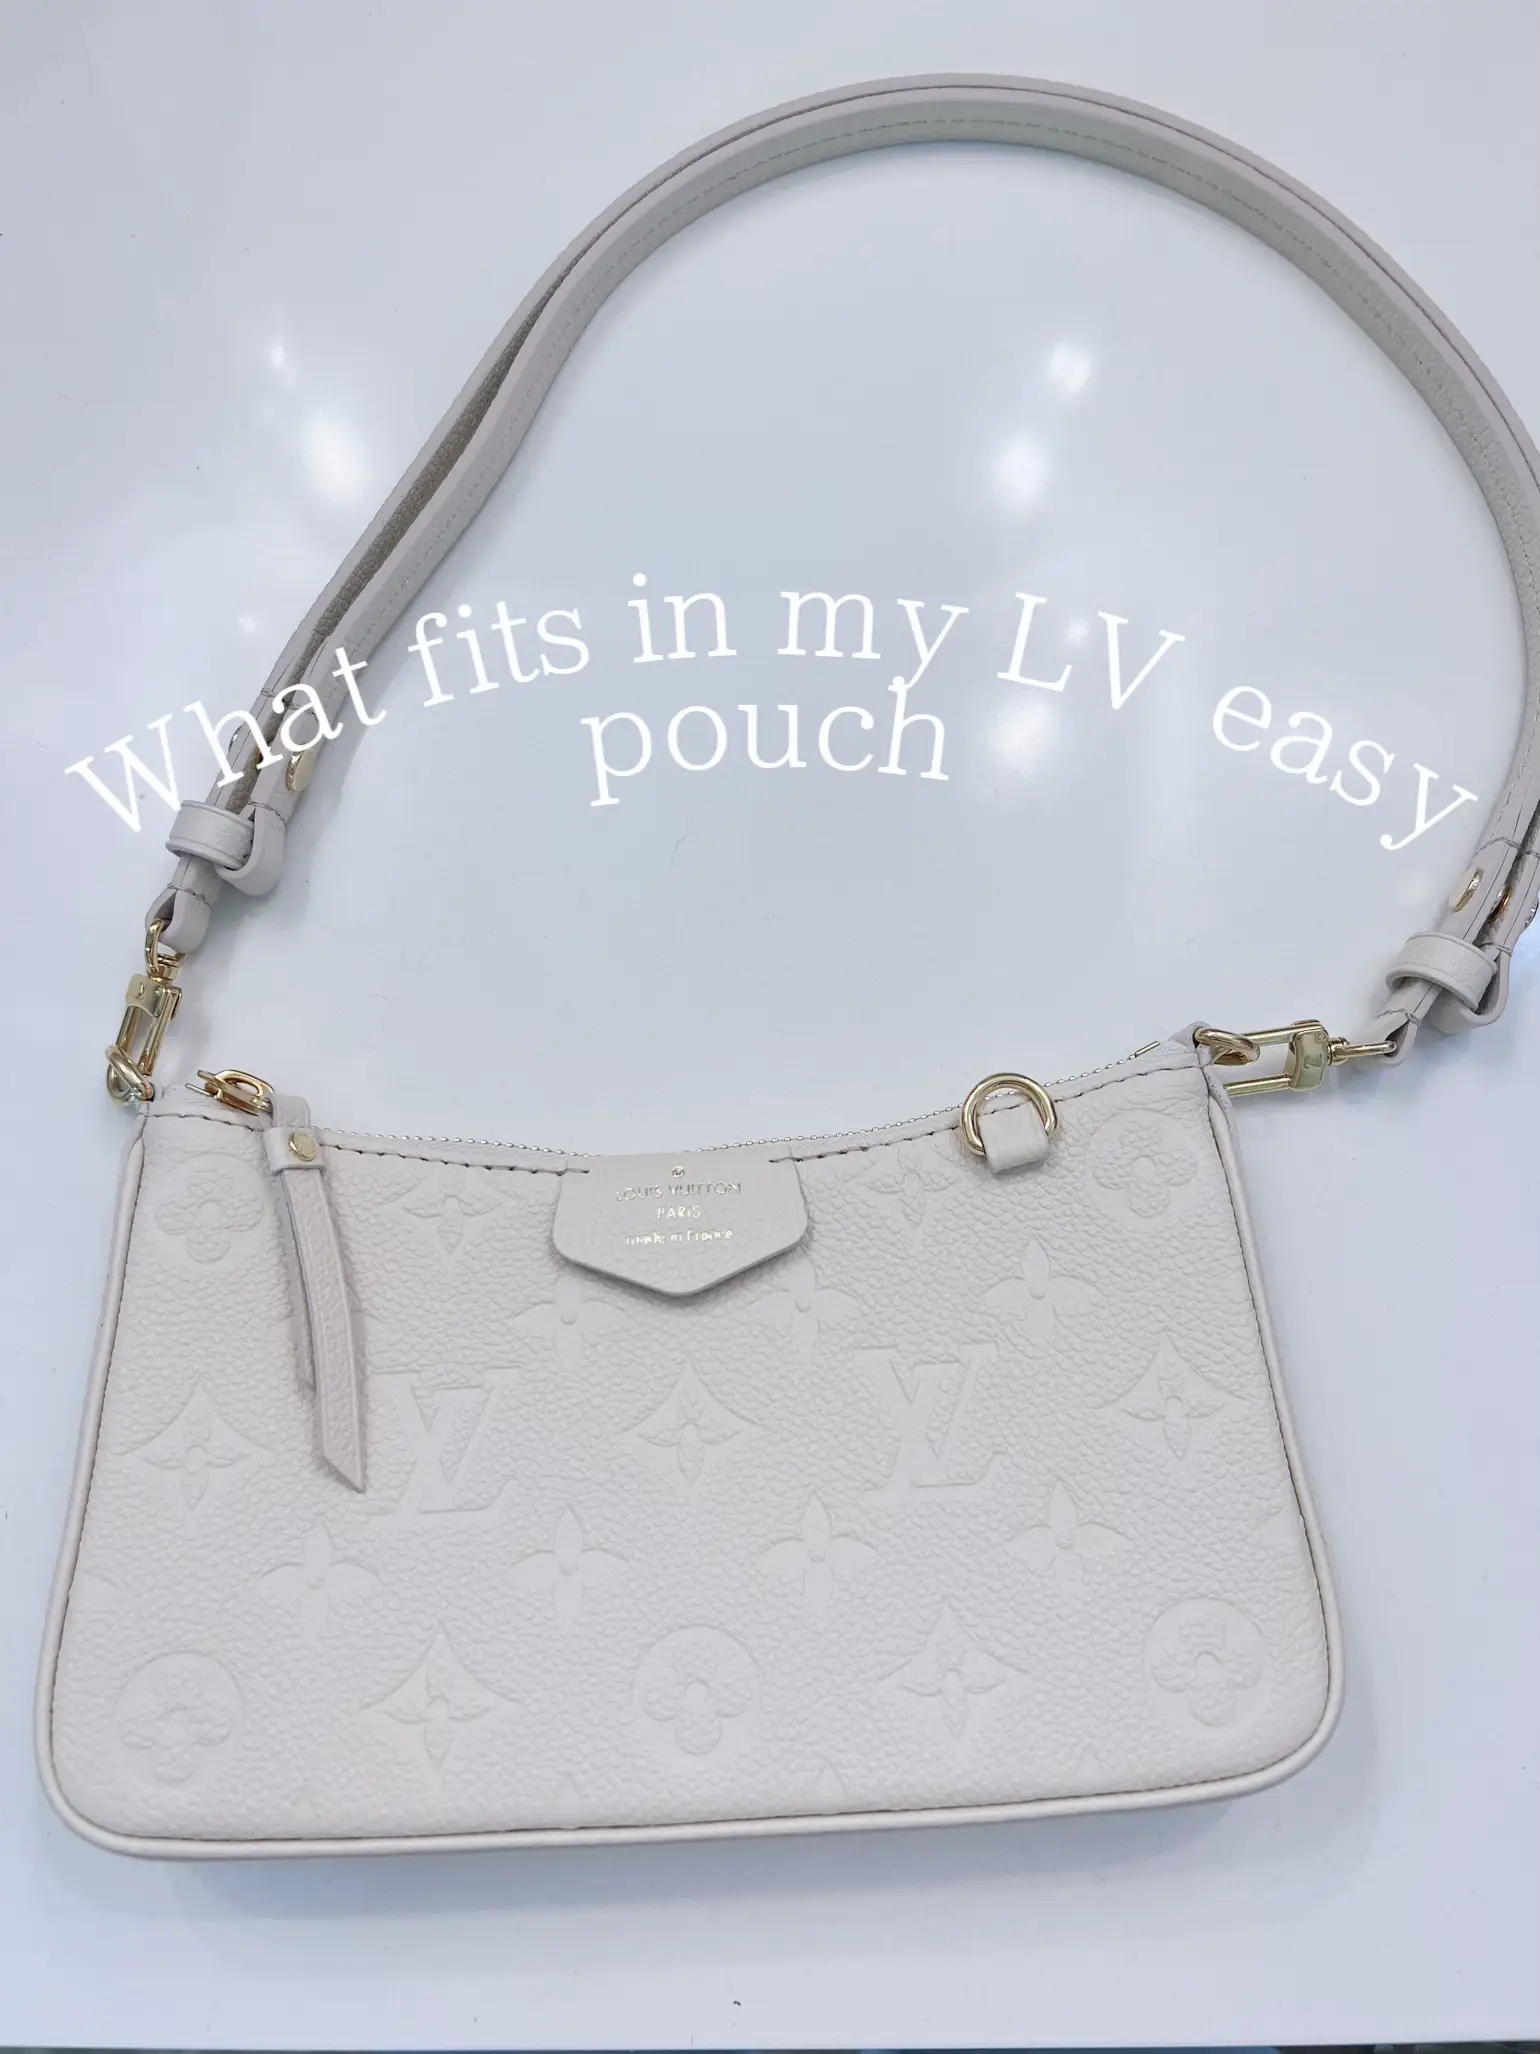 lv easy pouch on strap turtledove